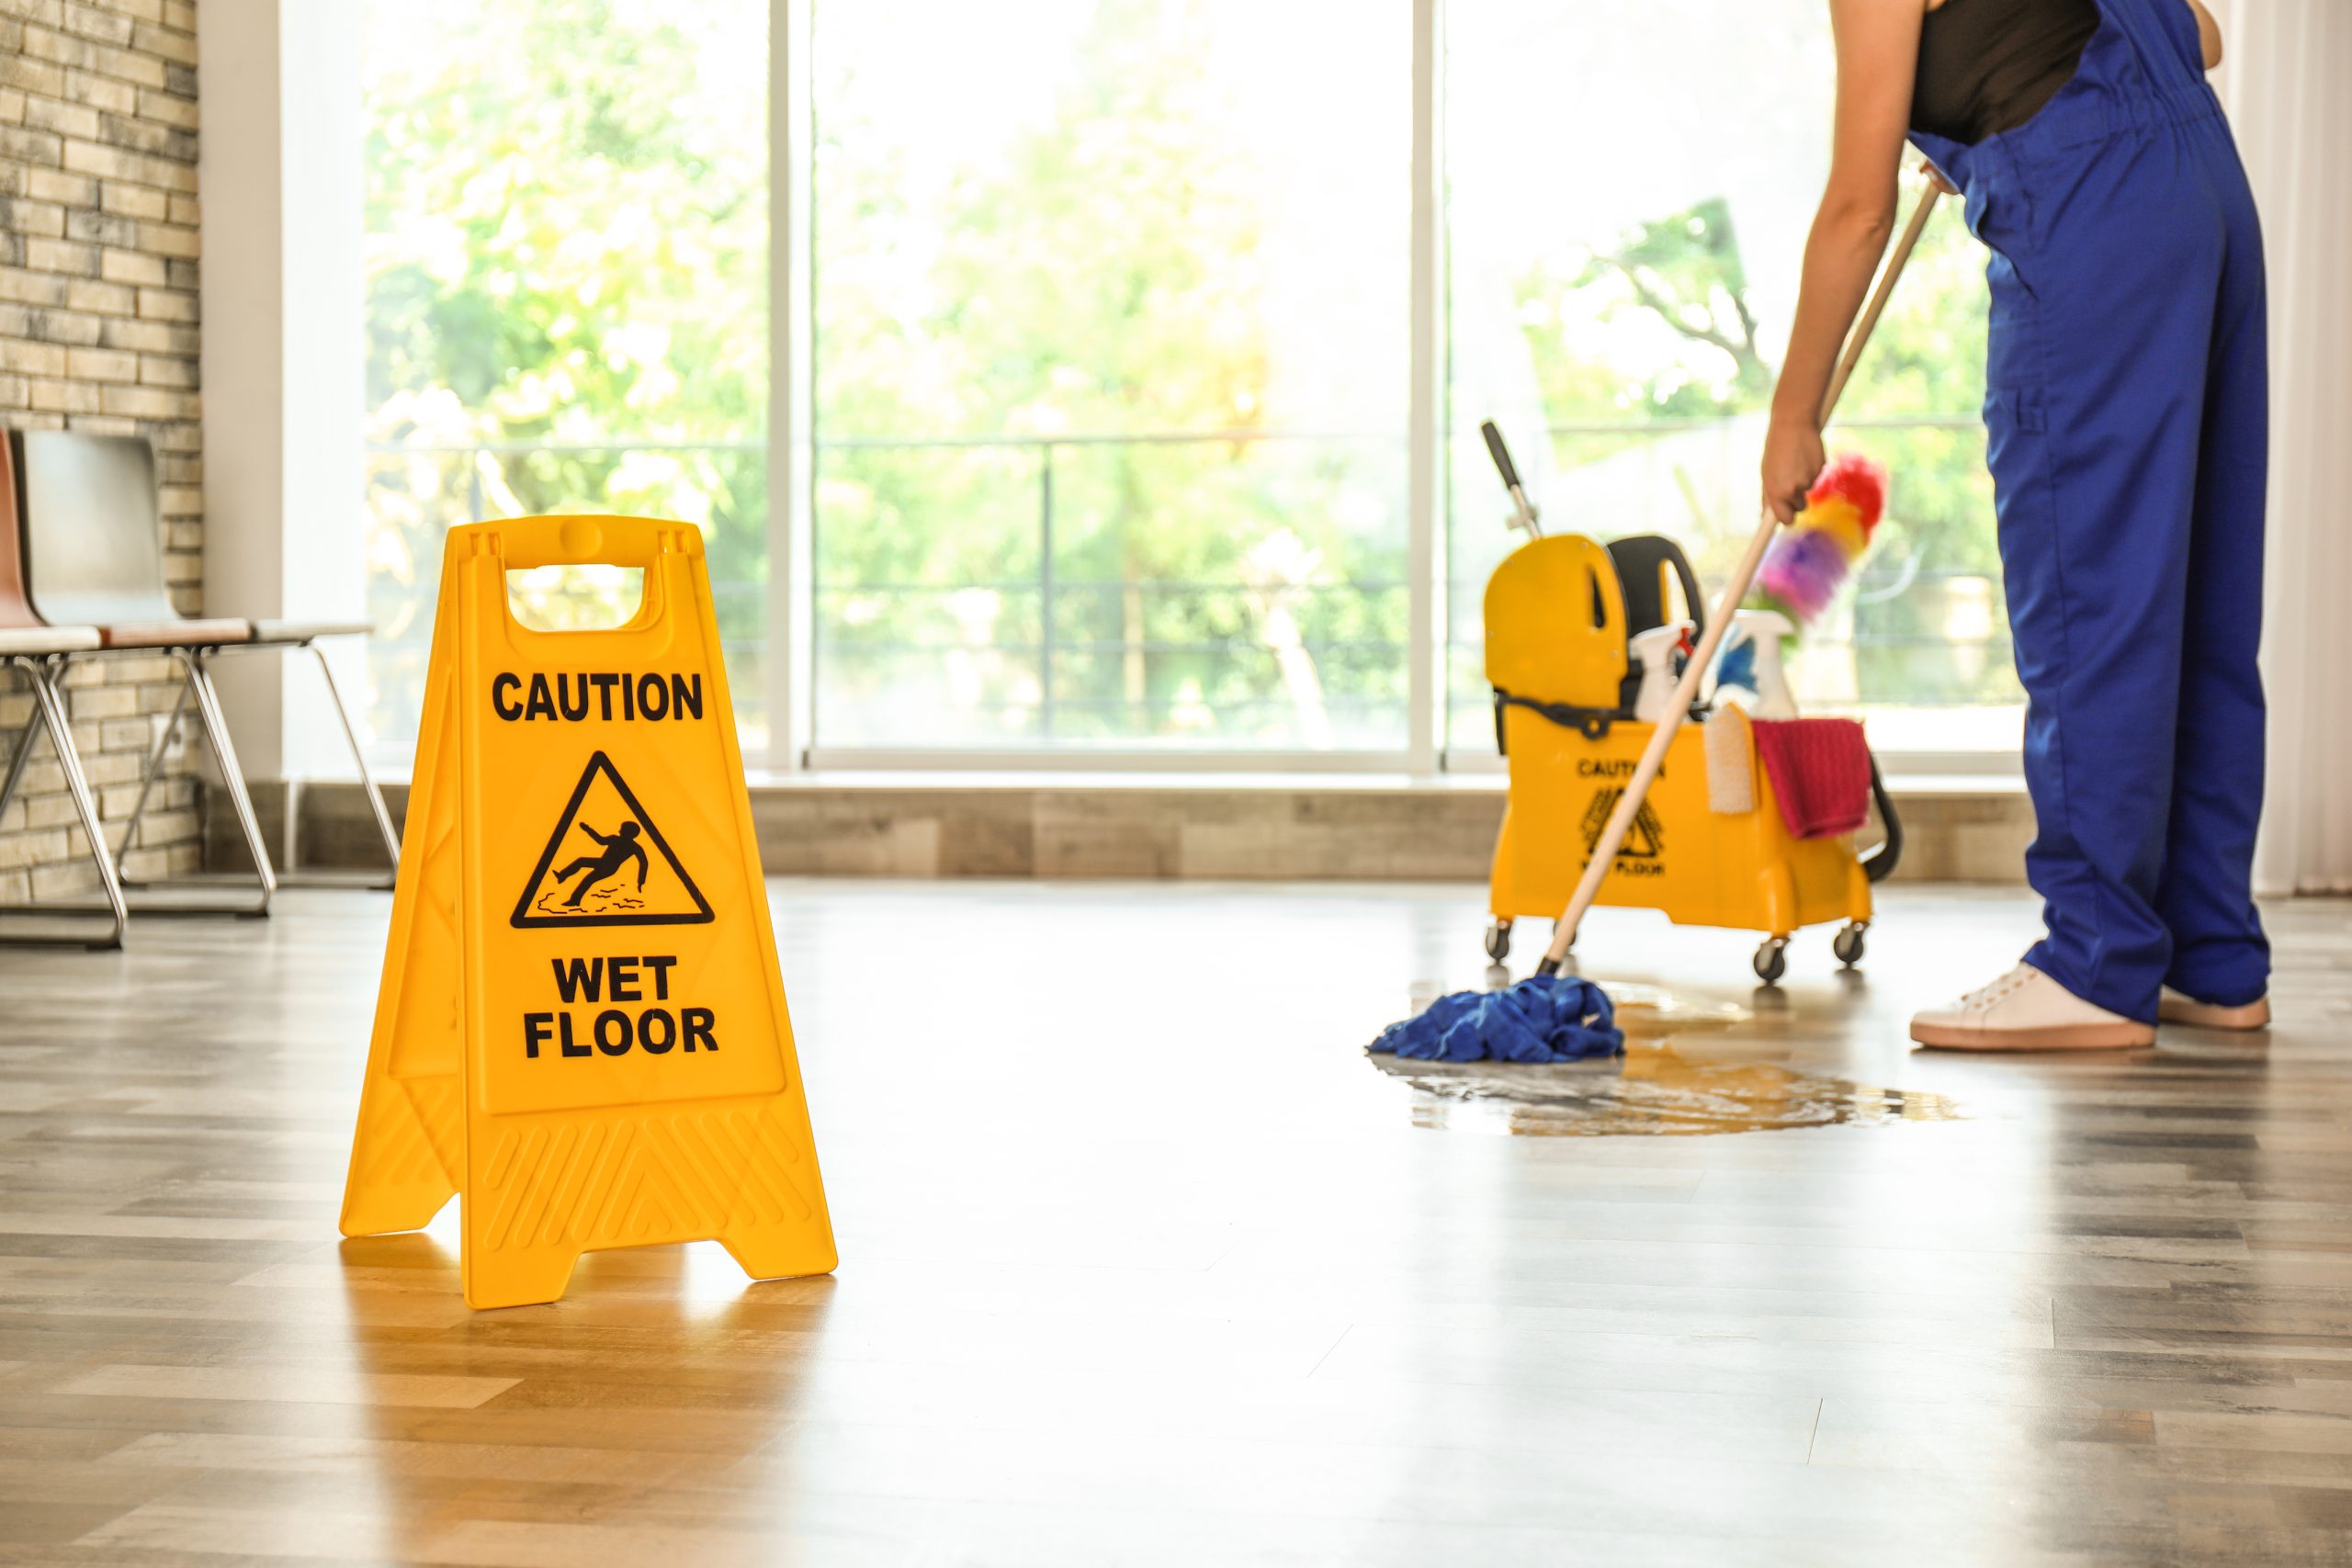 Does Fussy Cleaning offer any additional services beyond house cleaning in Edmonton?